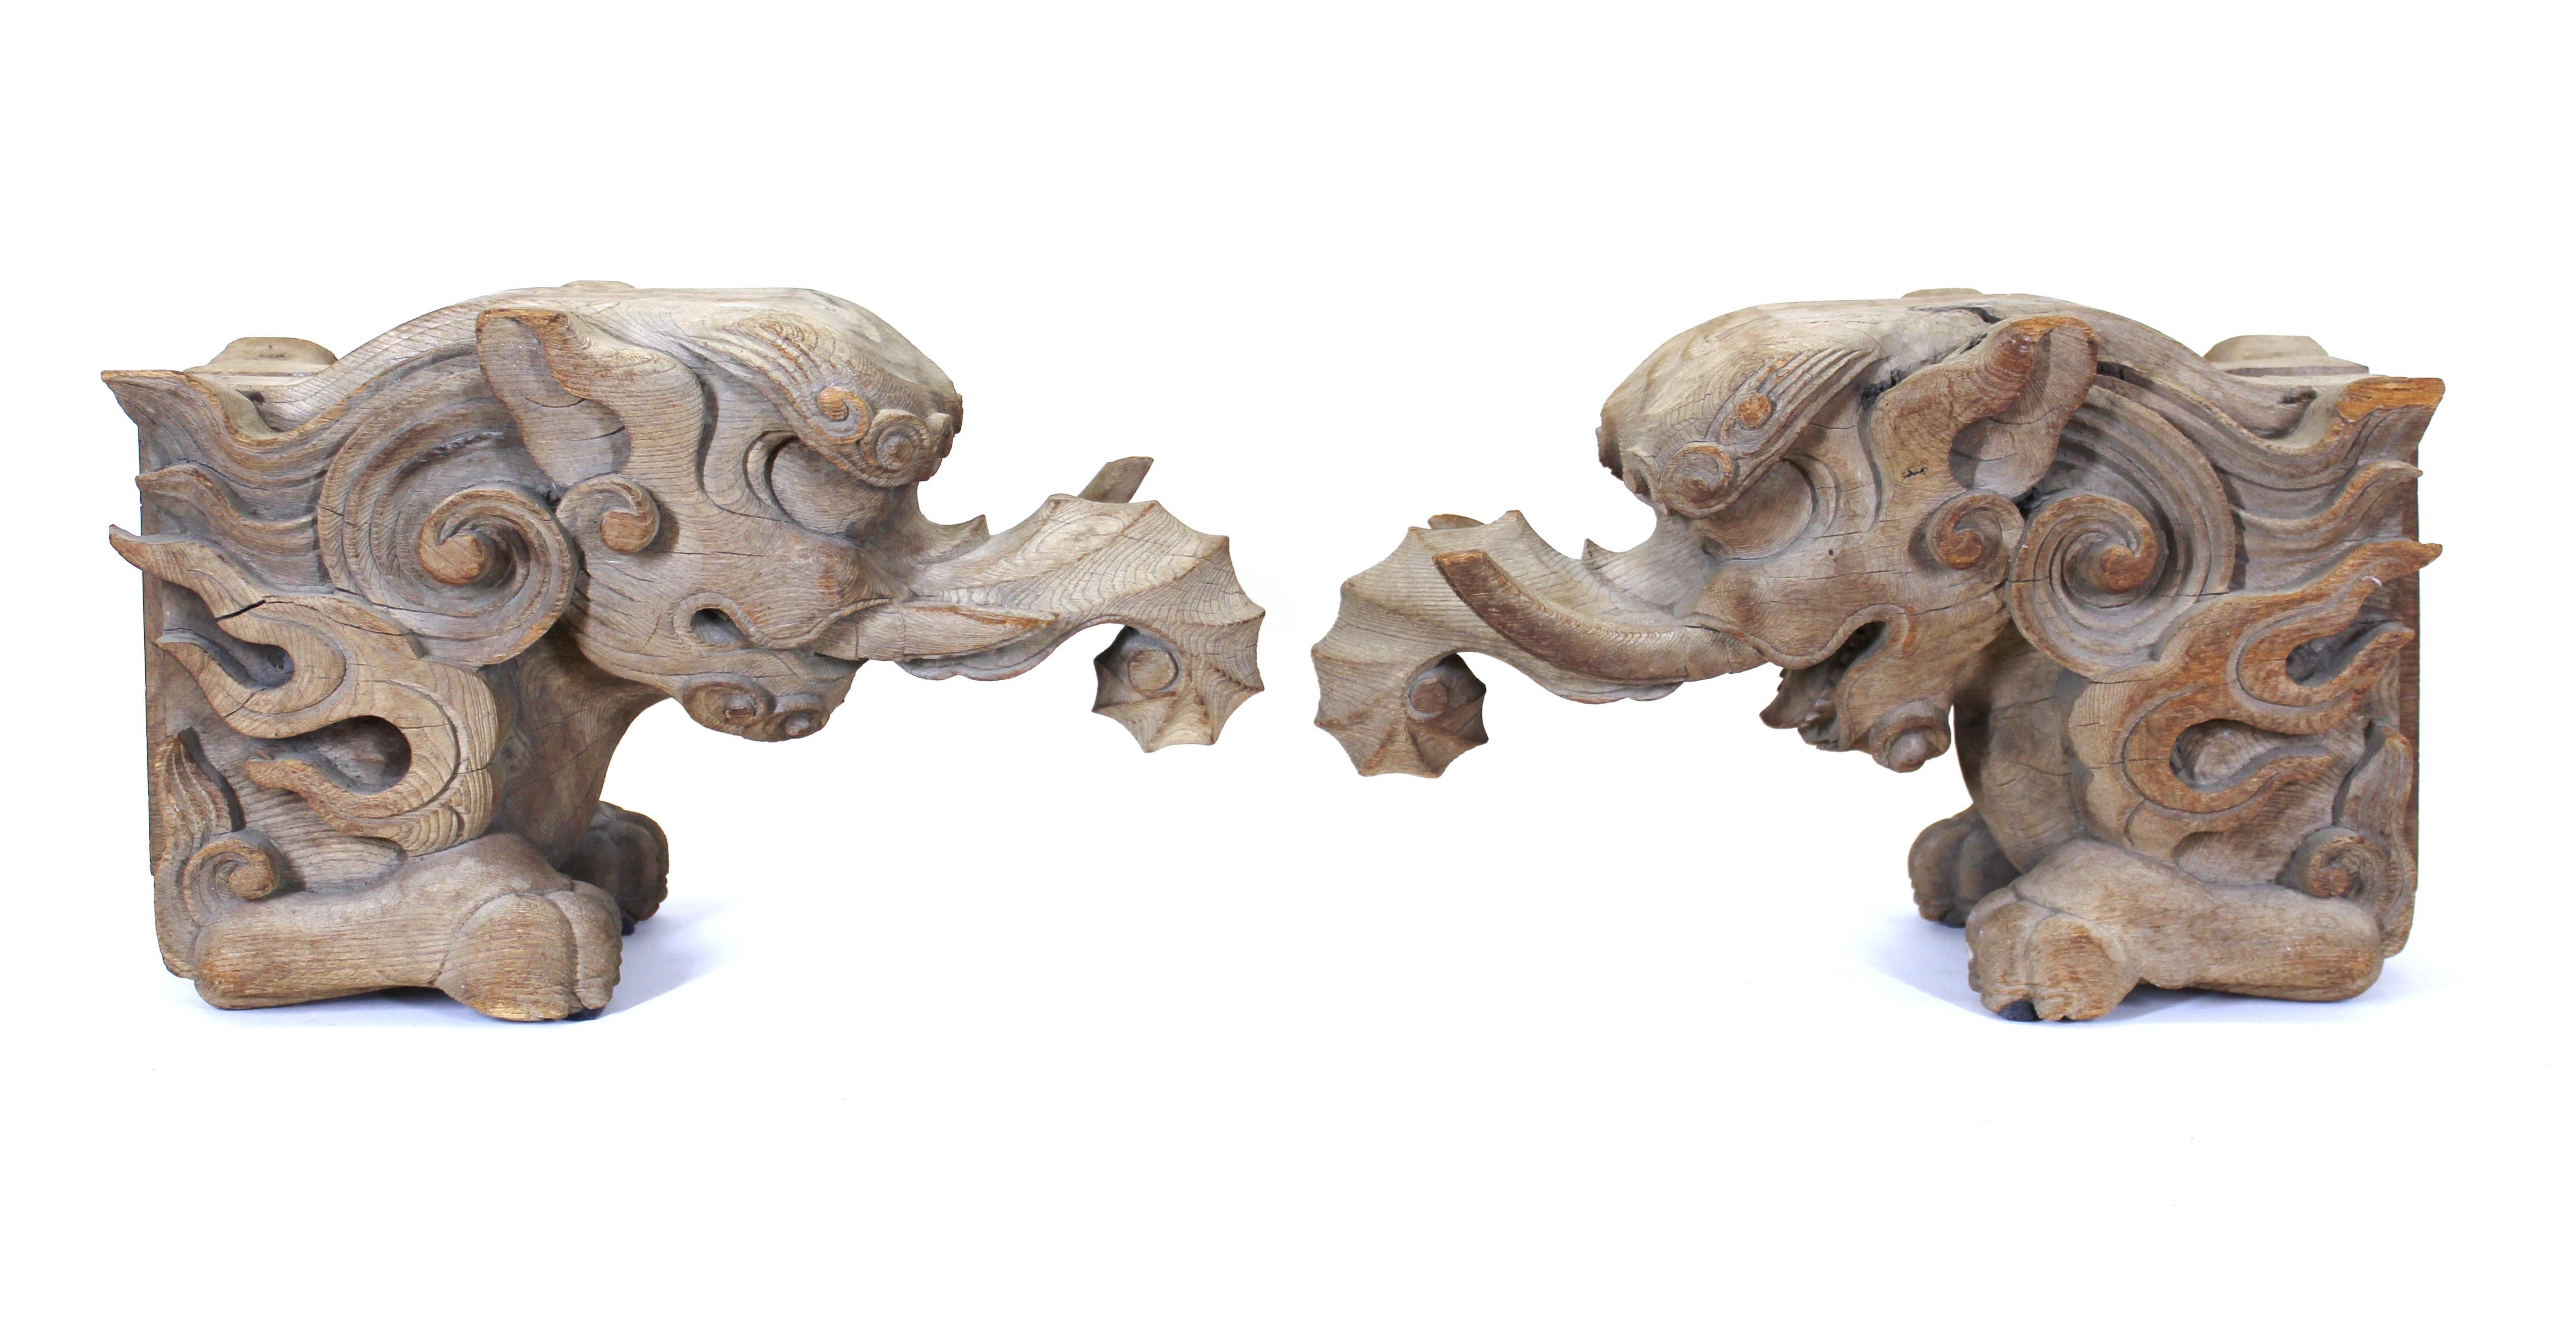 Japanese Momoyama period rare early pair of Baku figures, carved in keyaki wood with an exquisite wood grain, 17th century, circa 1650.
The elephant-like Baku is an imaginary and composite creature from Chinese mythology, thought to prevent or